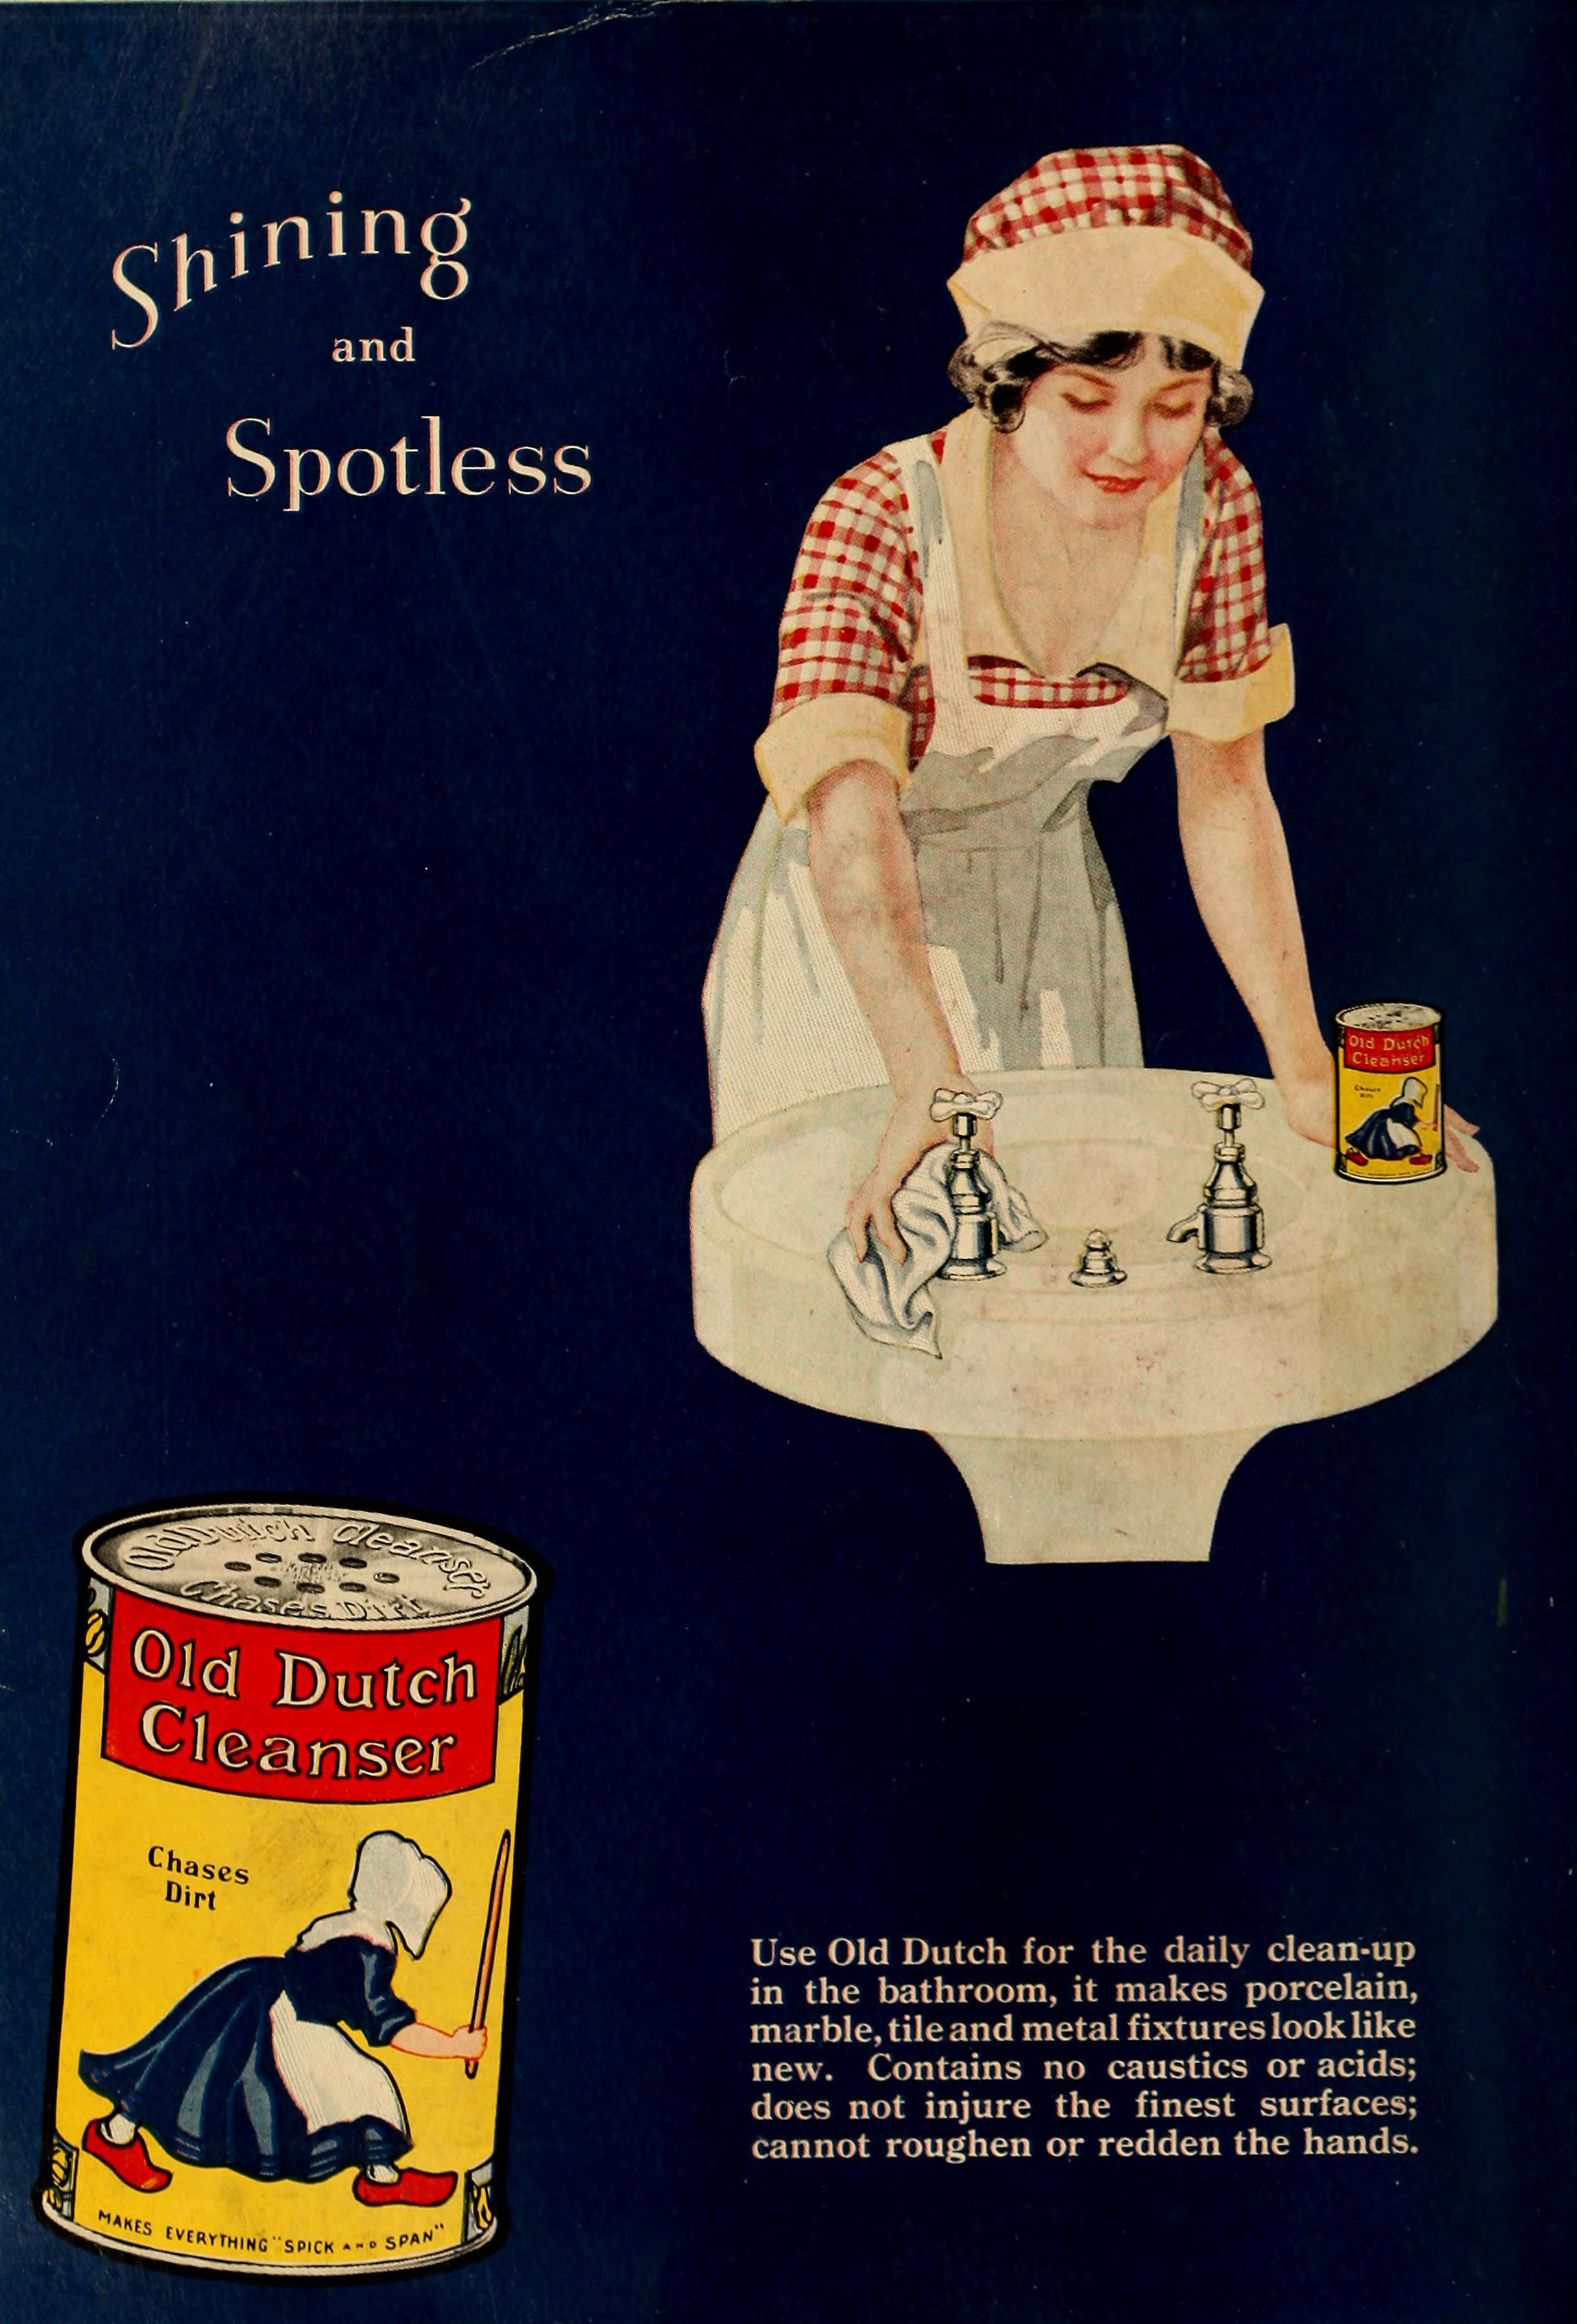 Old Dutch Cleanser Ad circa 1921 - Shining and Spotless